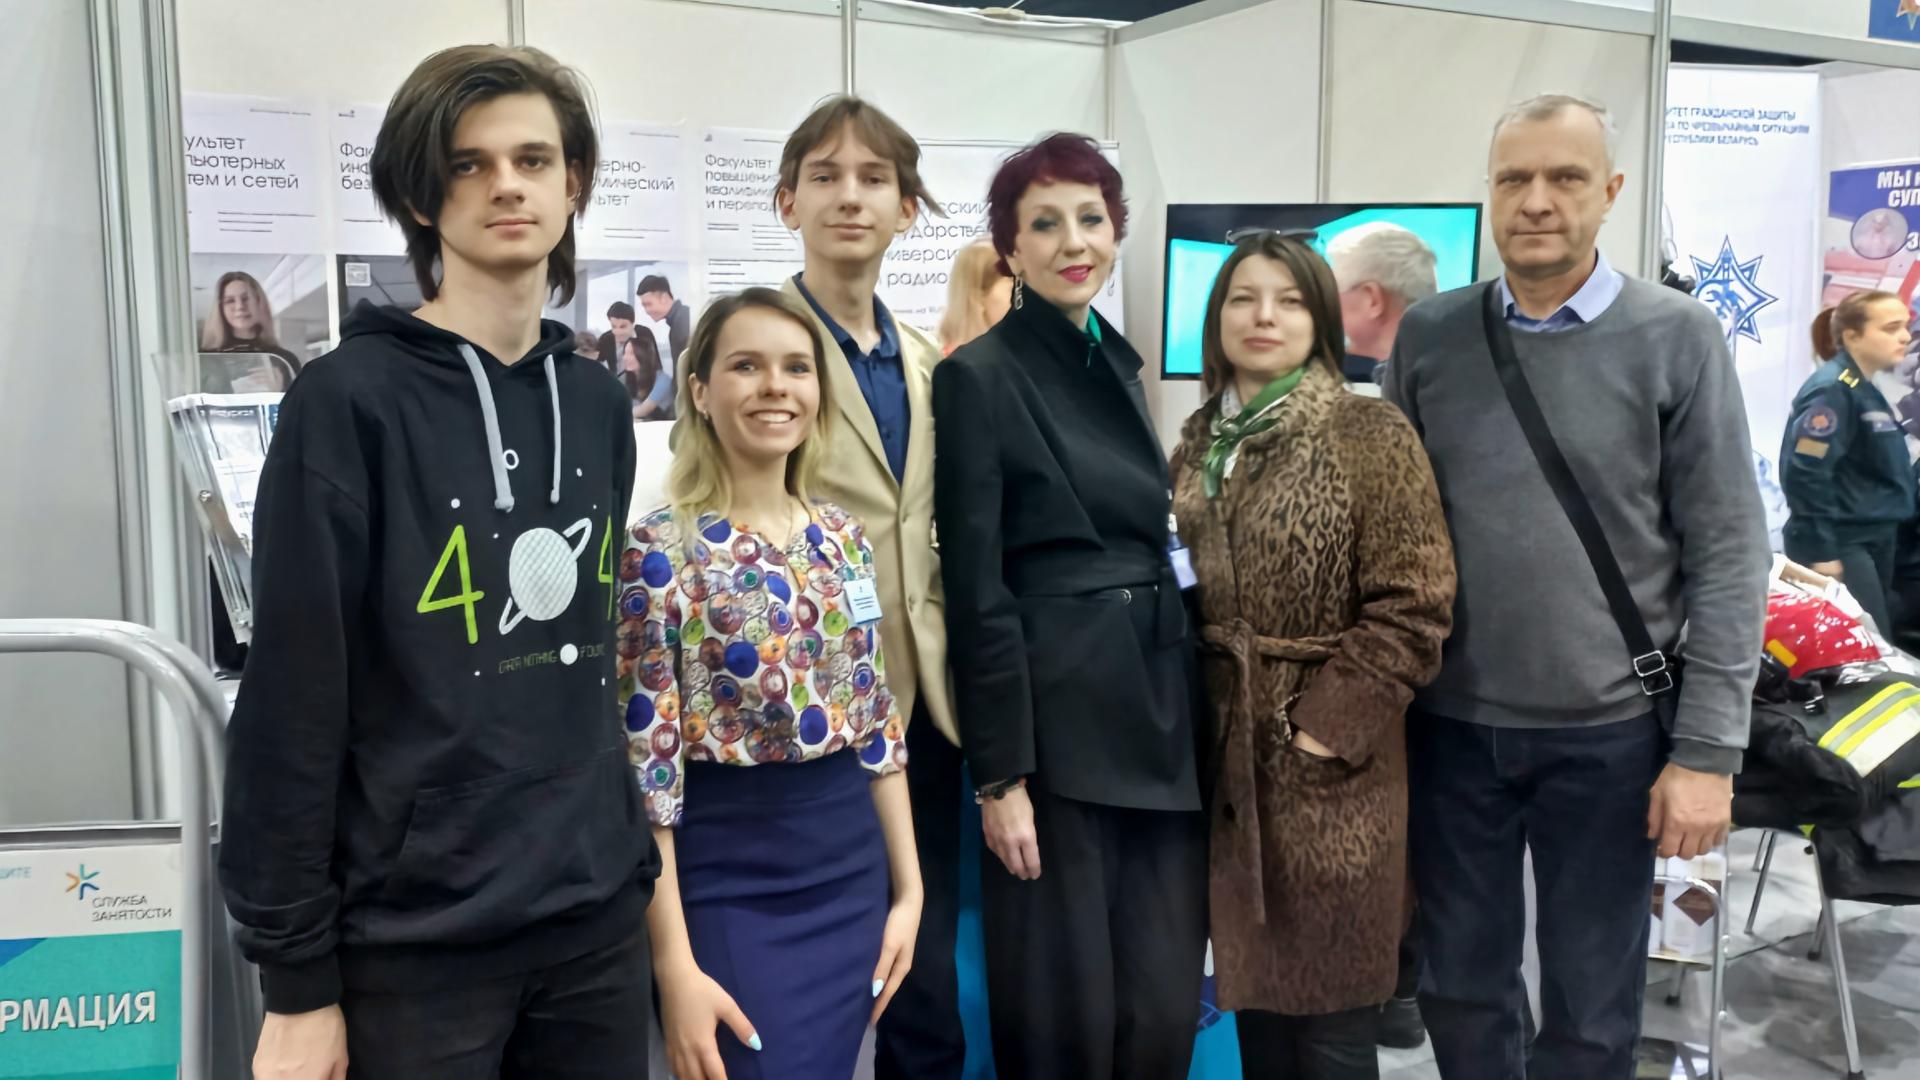 21st International Specialized Exhibition “Education and Career”